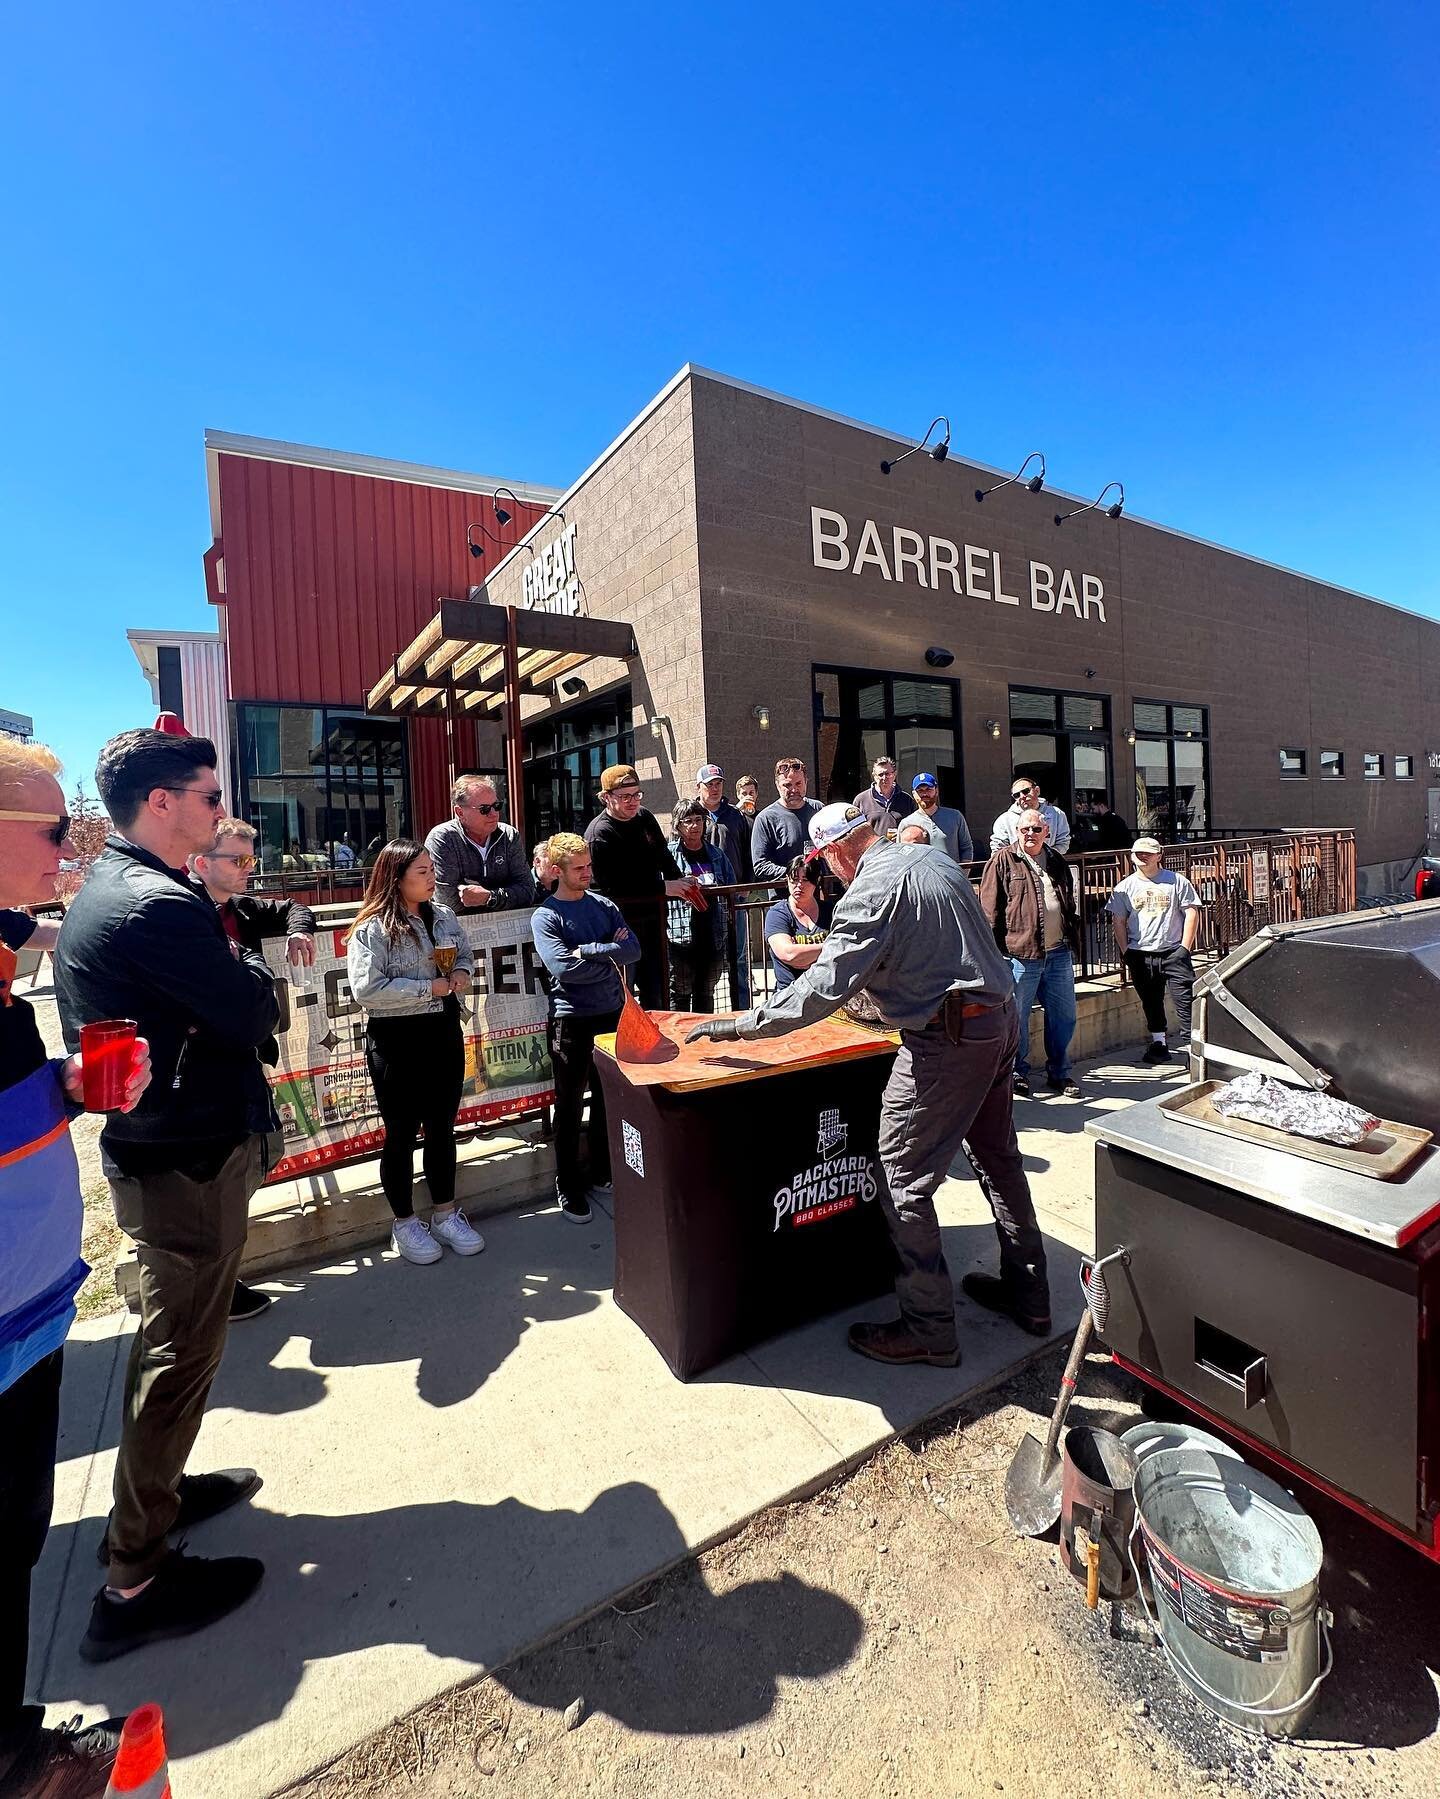 It&rsquo;s BBQ SZN and @backyardpitmasters_co is here to teach you how to become a pro backyard barbecue pitmaster. They offer classes every weekend at breweries and distilleries throughout the Front Range, including:

5/6: BrisketU at @madrabbitdist